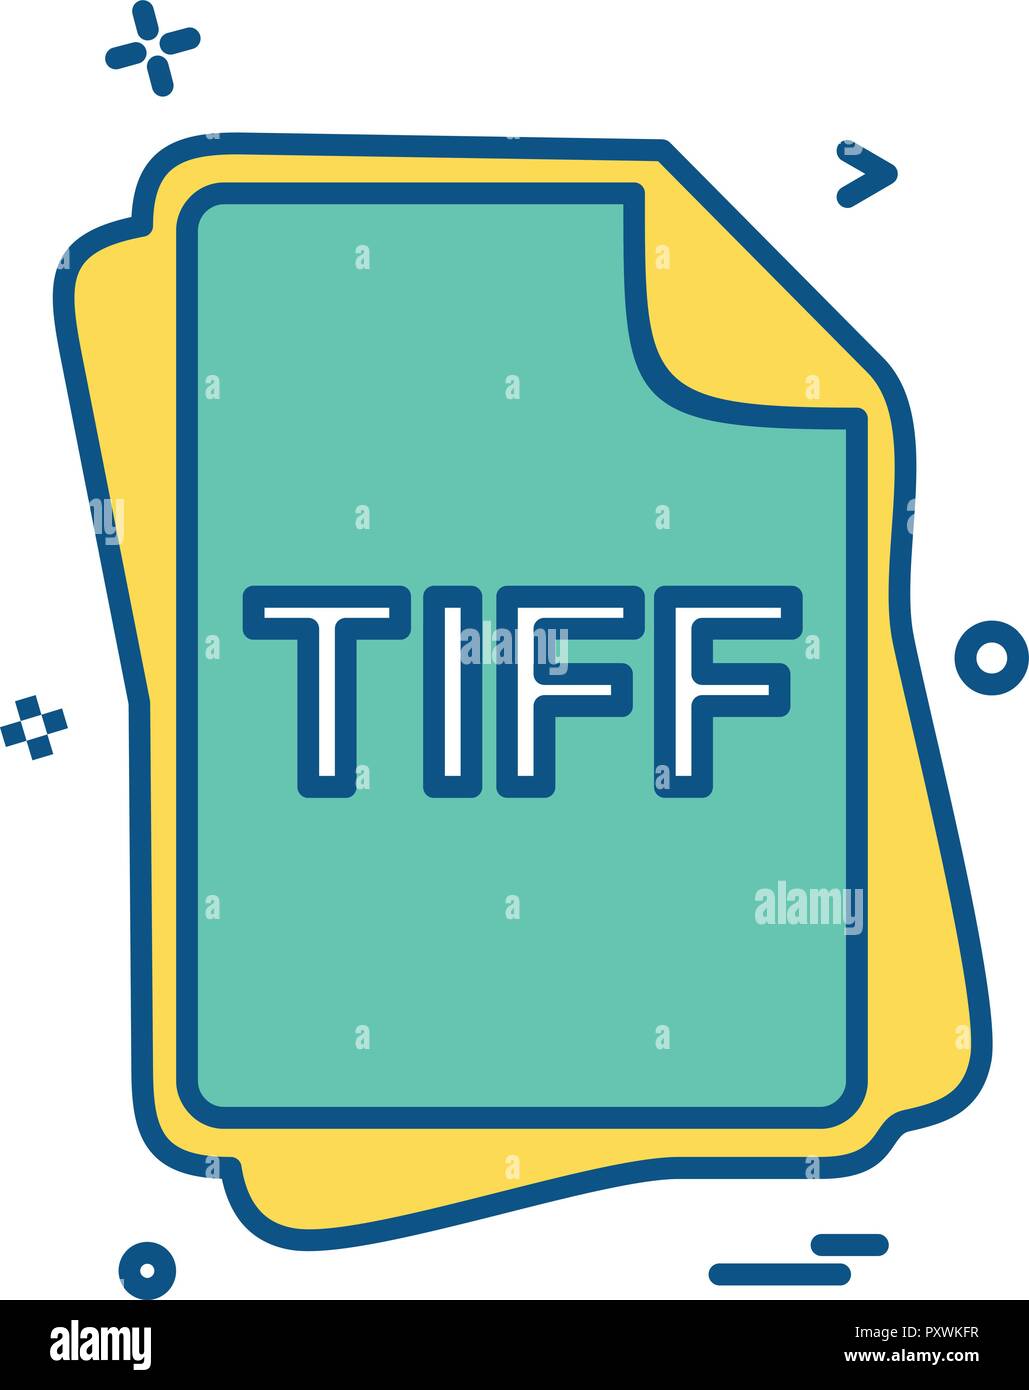 Tiff file type Stock Vector Images - Alamy